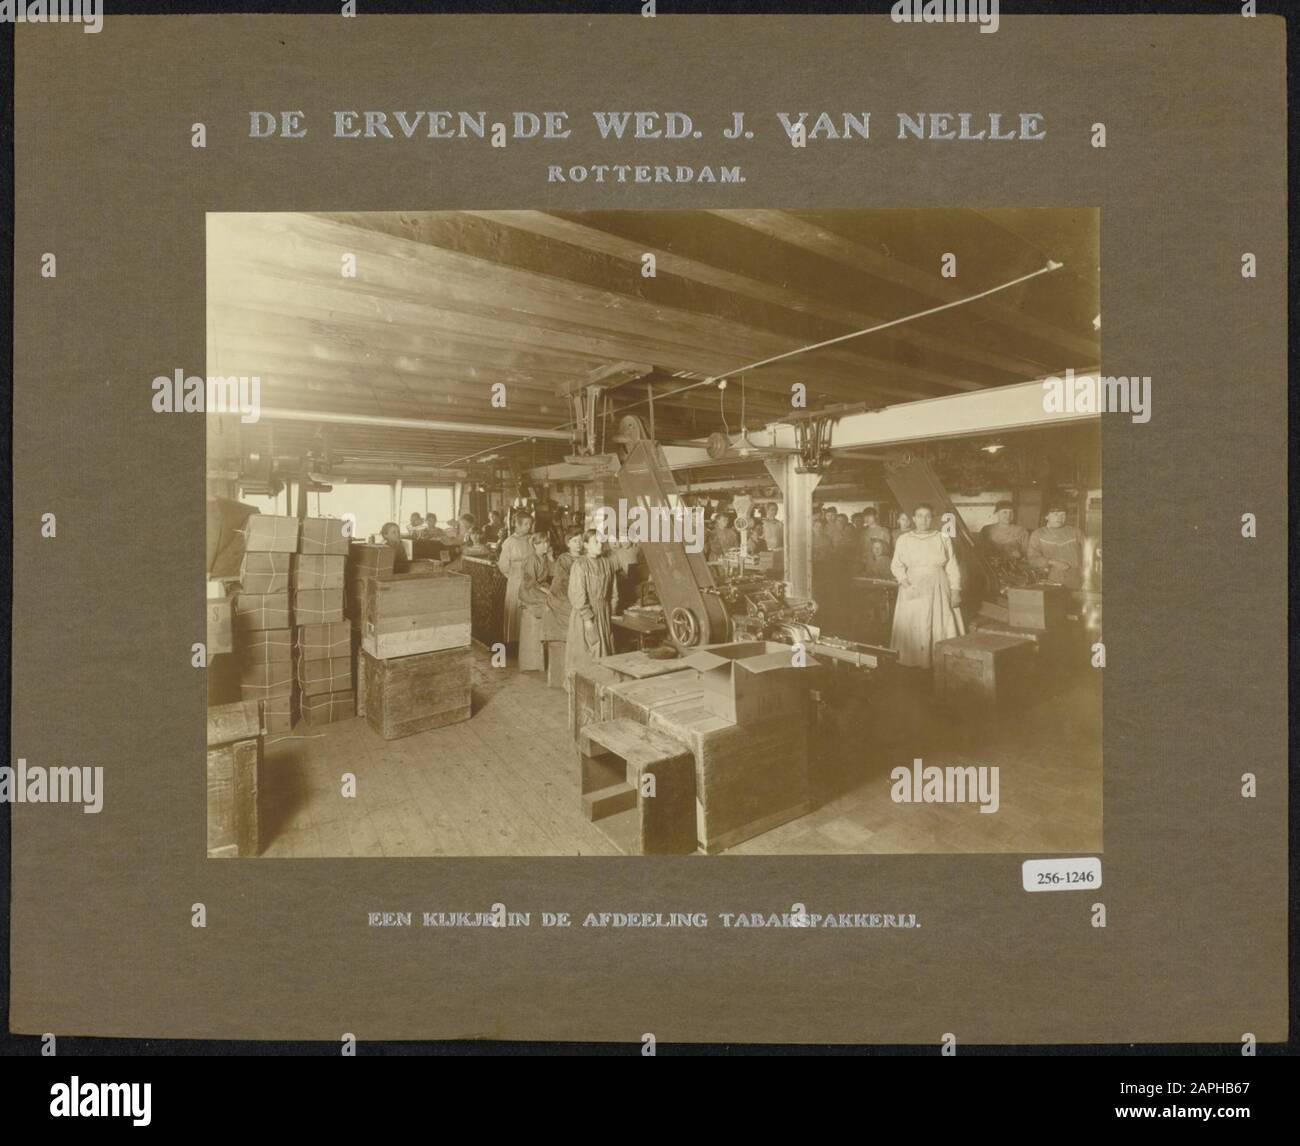 Description: The tobacco pack department in the factory of the heirs the bet. J. van Nelle, Rotterdam. This is one of the photographs submitted by the Labour Inspectorate for the exhibition 'Education van den Jeugd over den school age', The Hague, July 16 - August 14, 1919 Date: Approximately 1919 Stock Photo